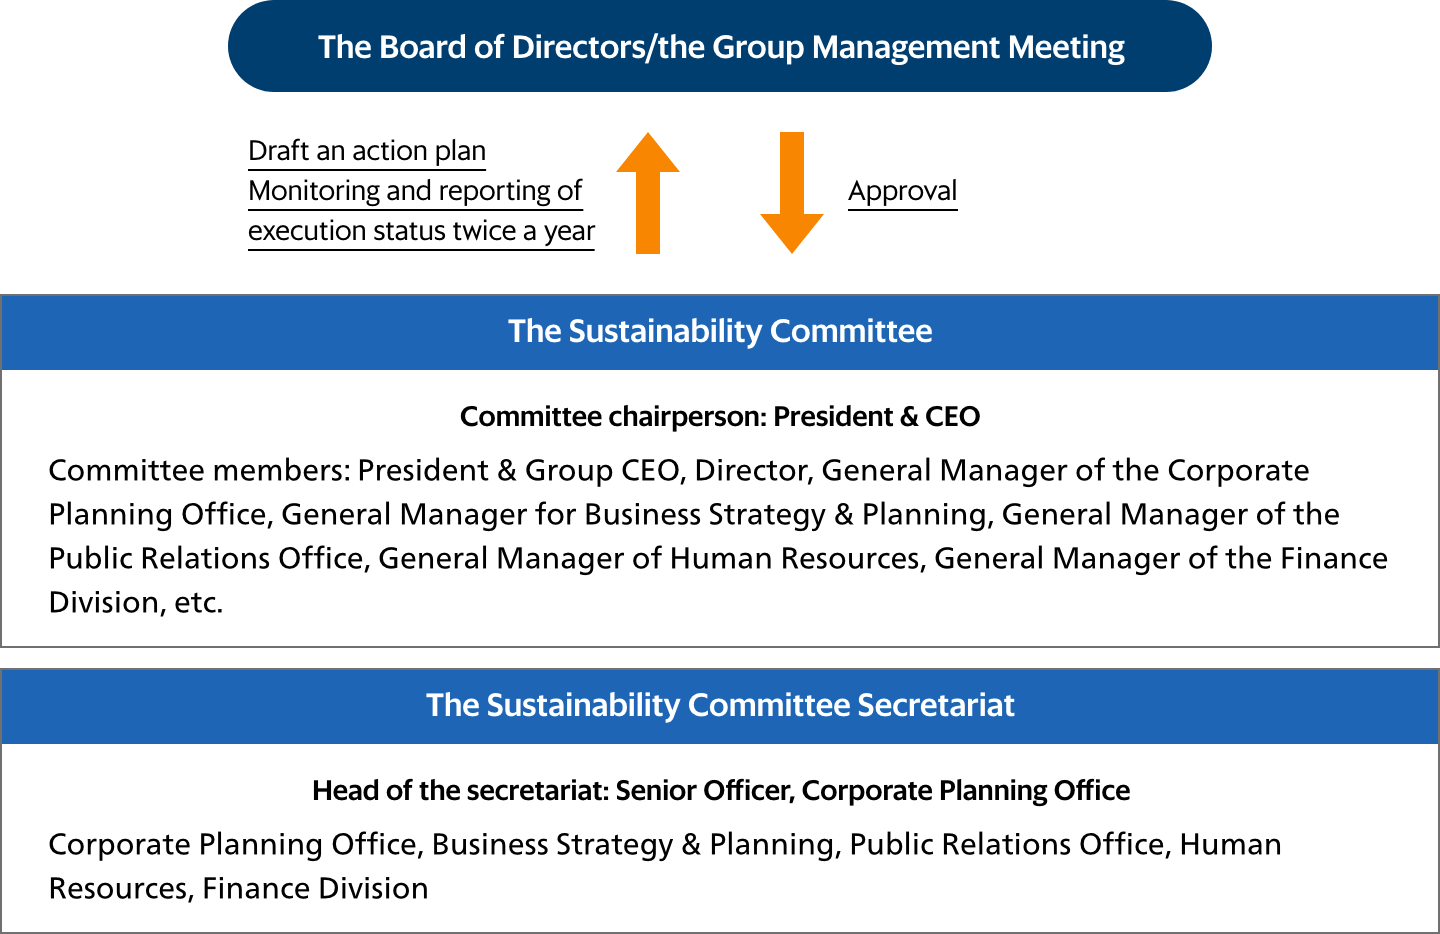 The Board of Directors/the Group Management Meeting